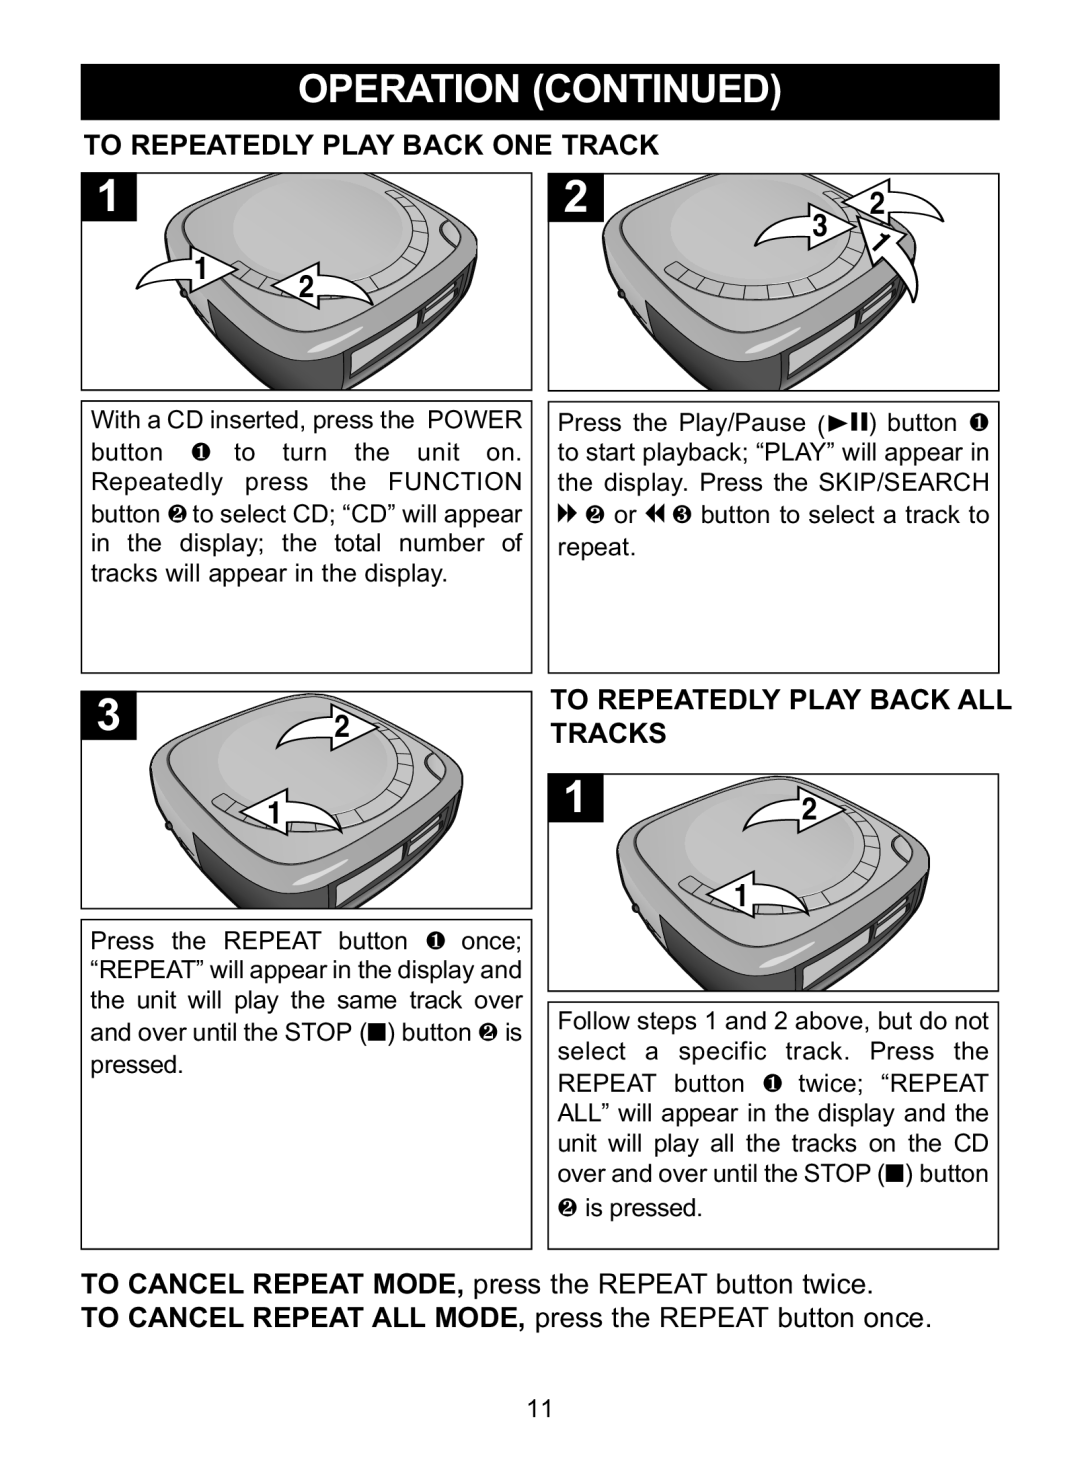 Memorex MC2864 manual To Repeatedly Play Back One Track, To Repeatedly Play Back All, Tracks, Operation Continued 